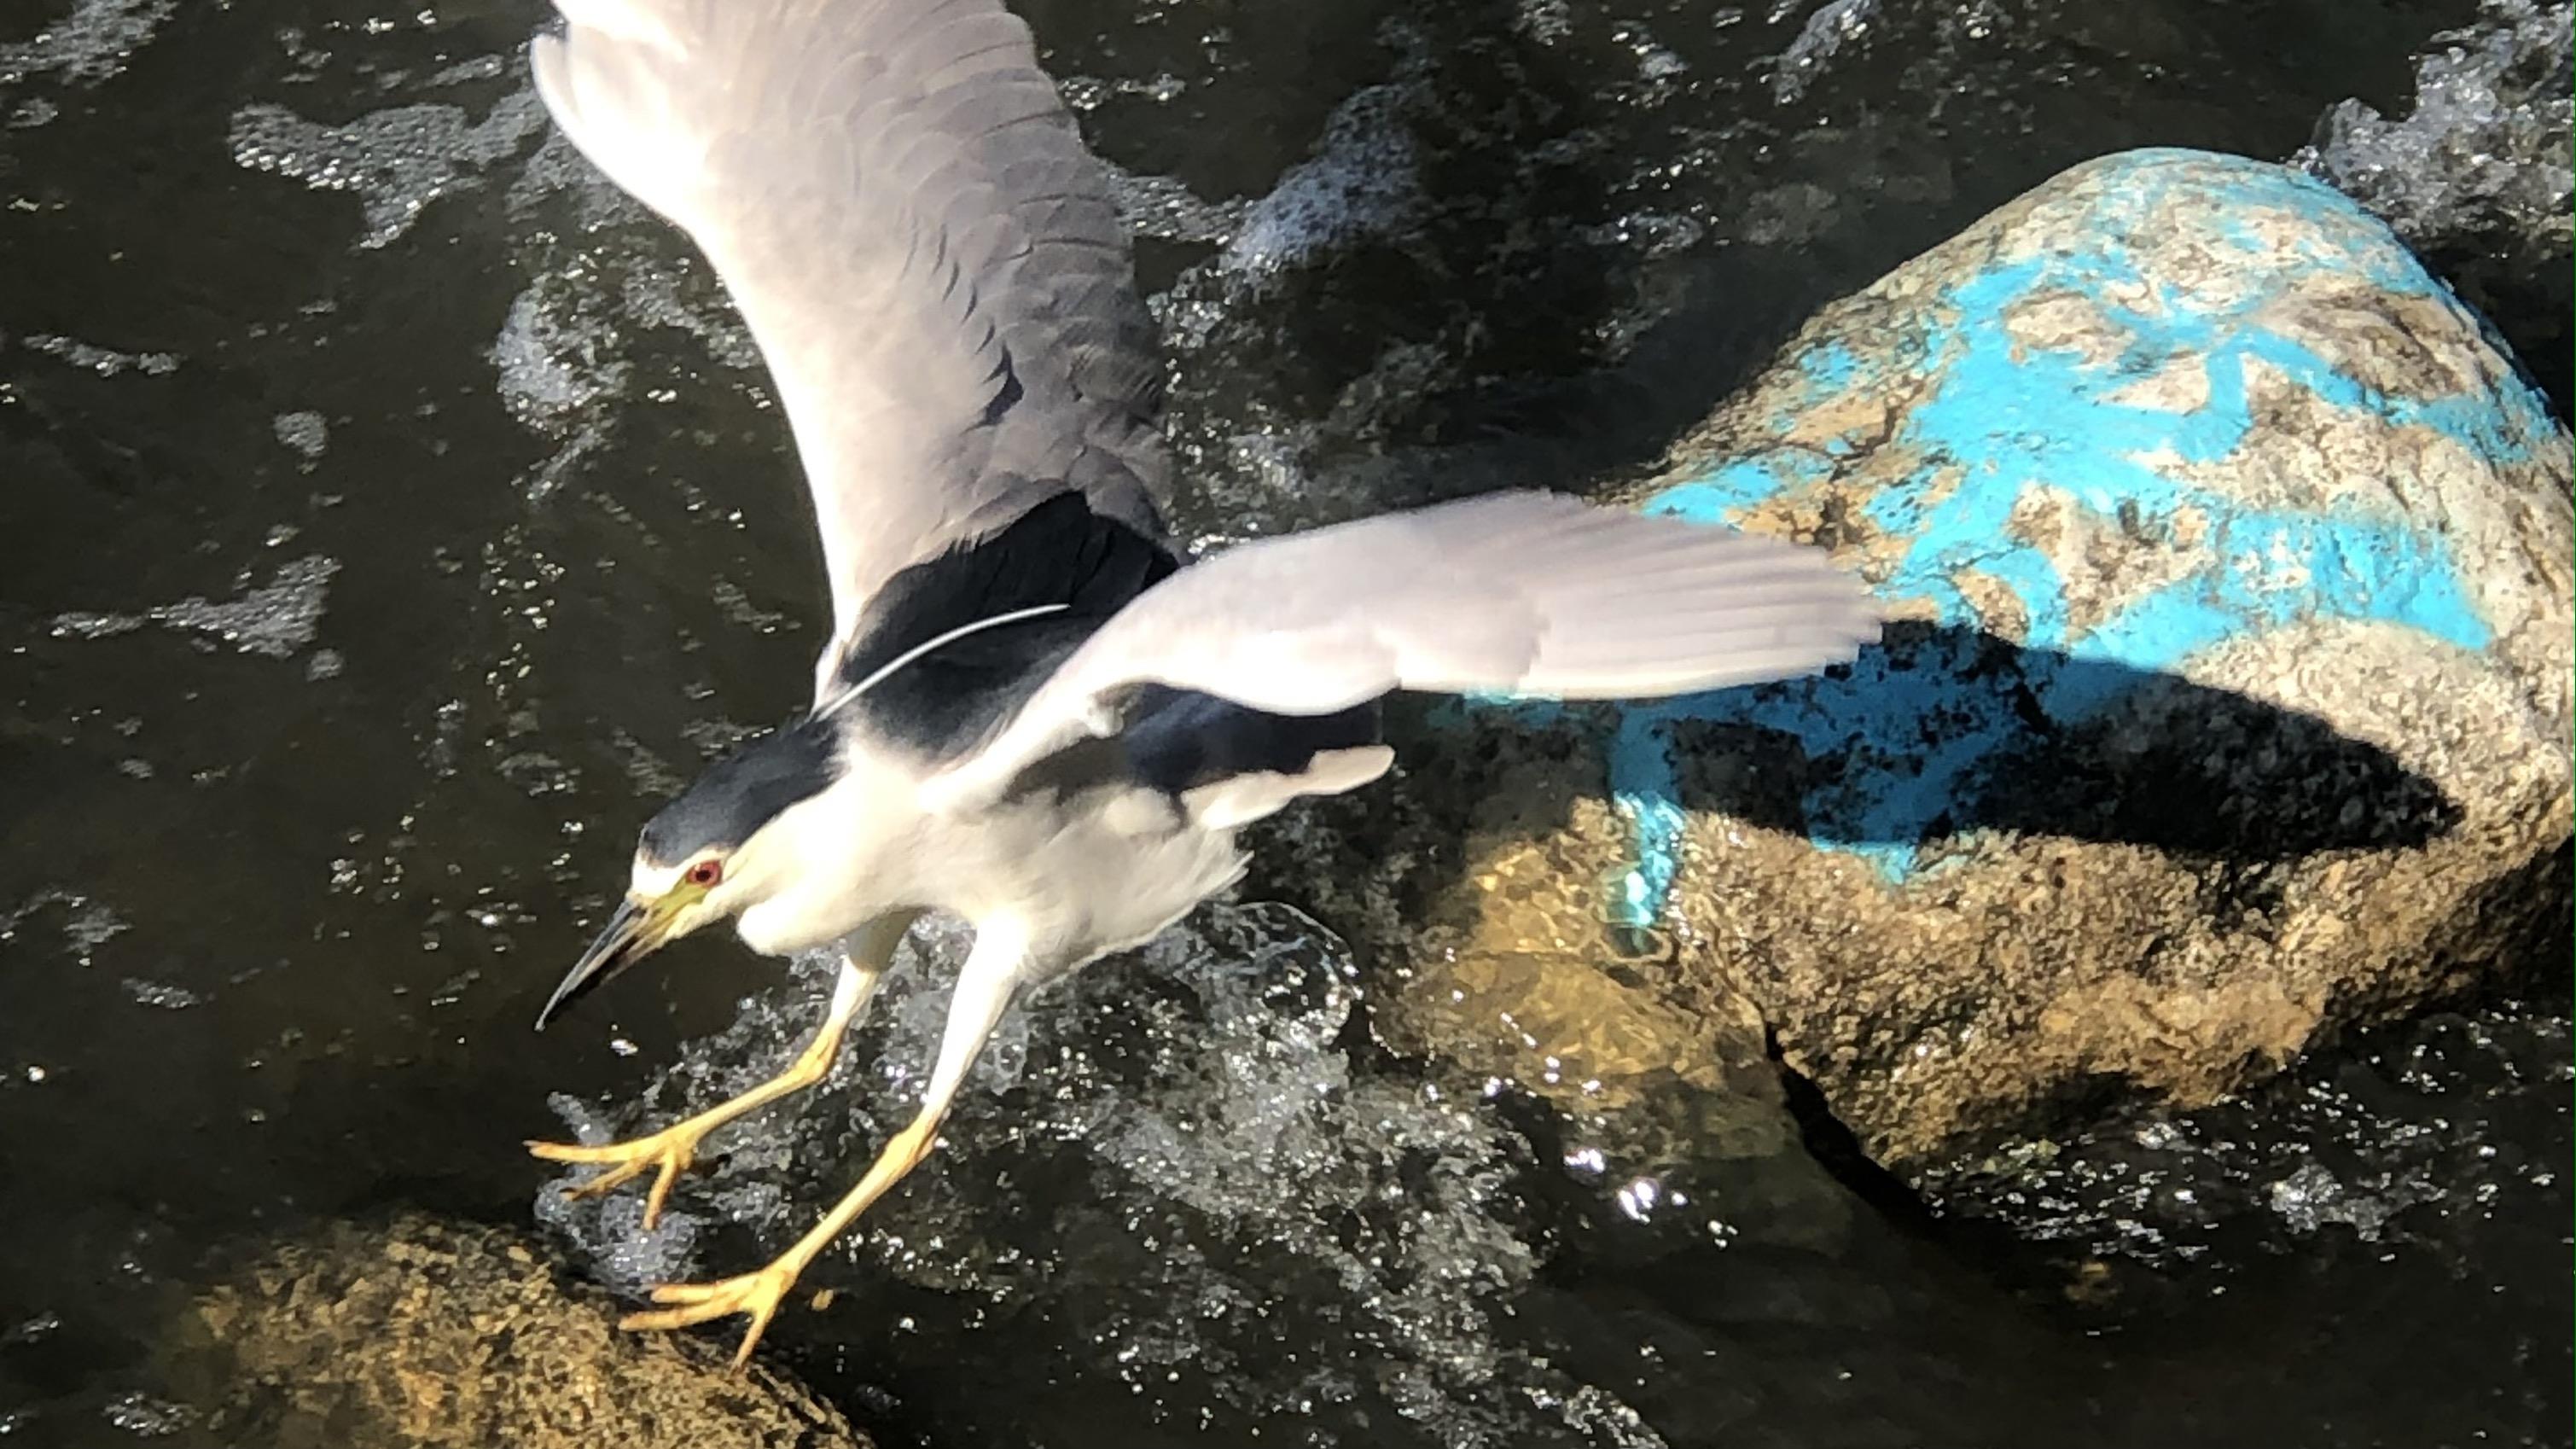 Though named for its famous black crown, the night heron's most distinctive physical trait is perhaps the long white plumes that extend from the back of its head. (Patty Wetli / WTTW News)